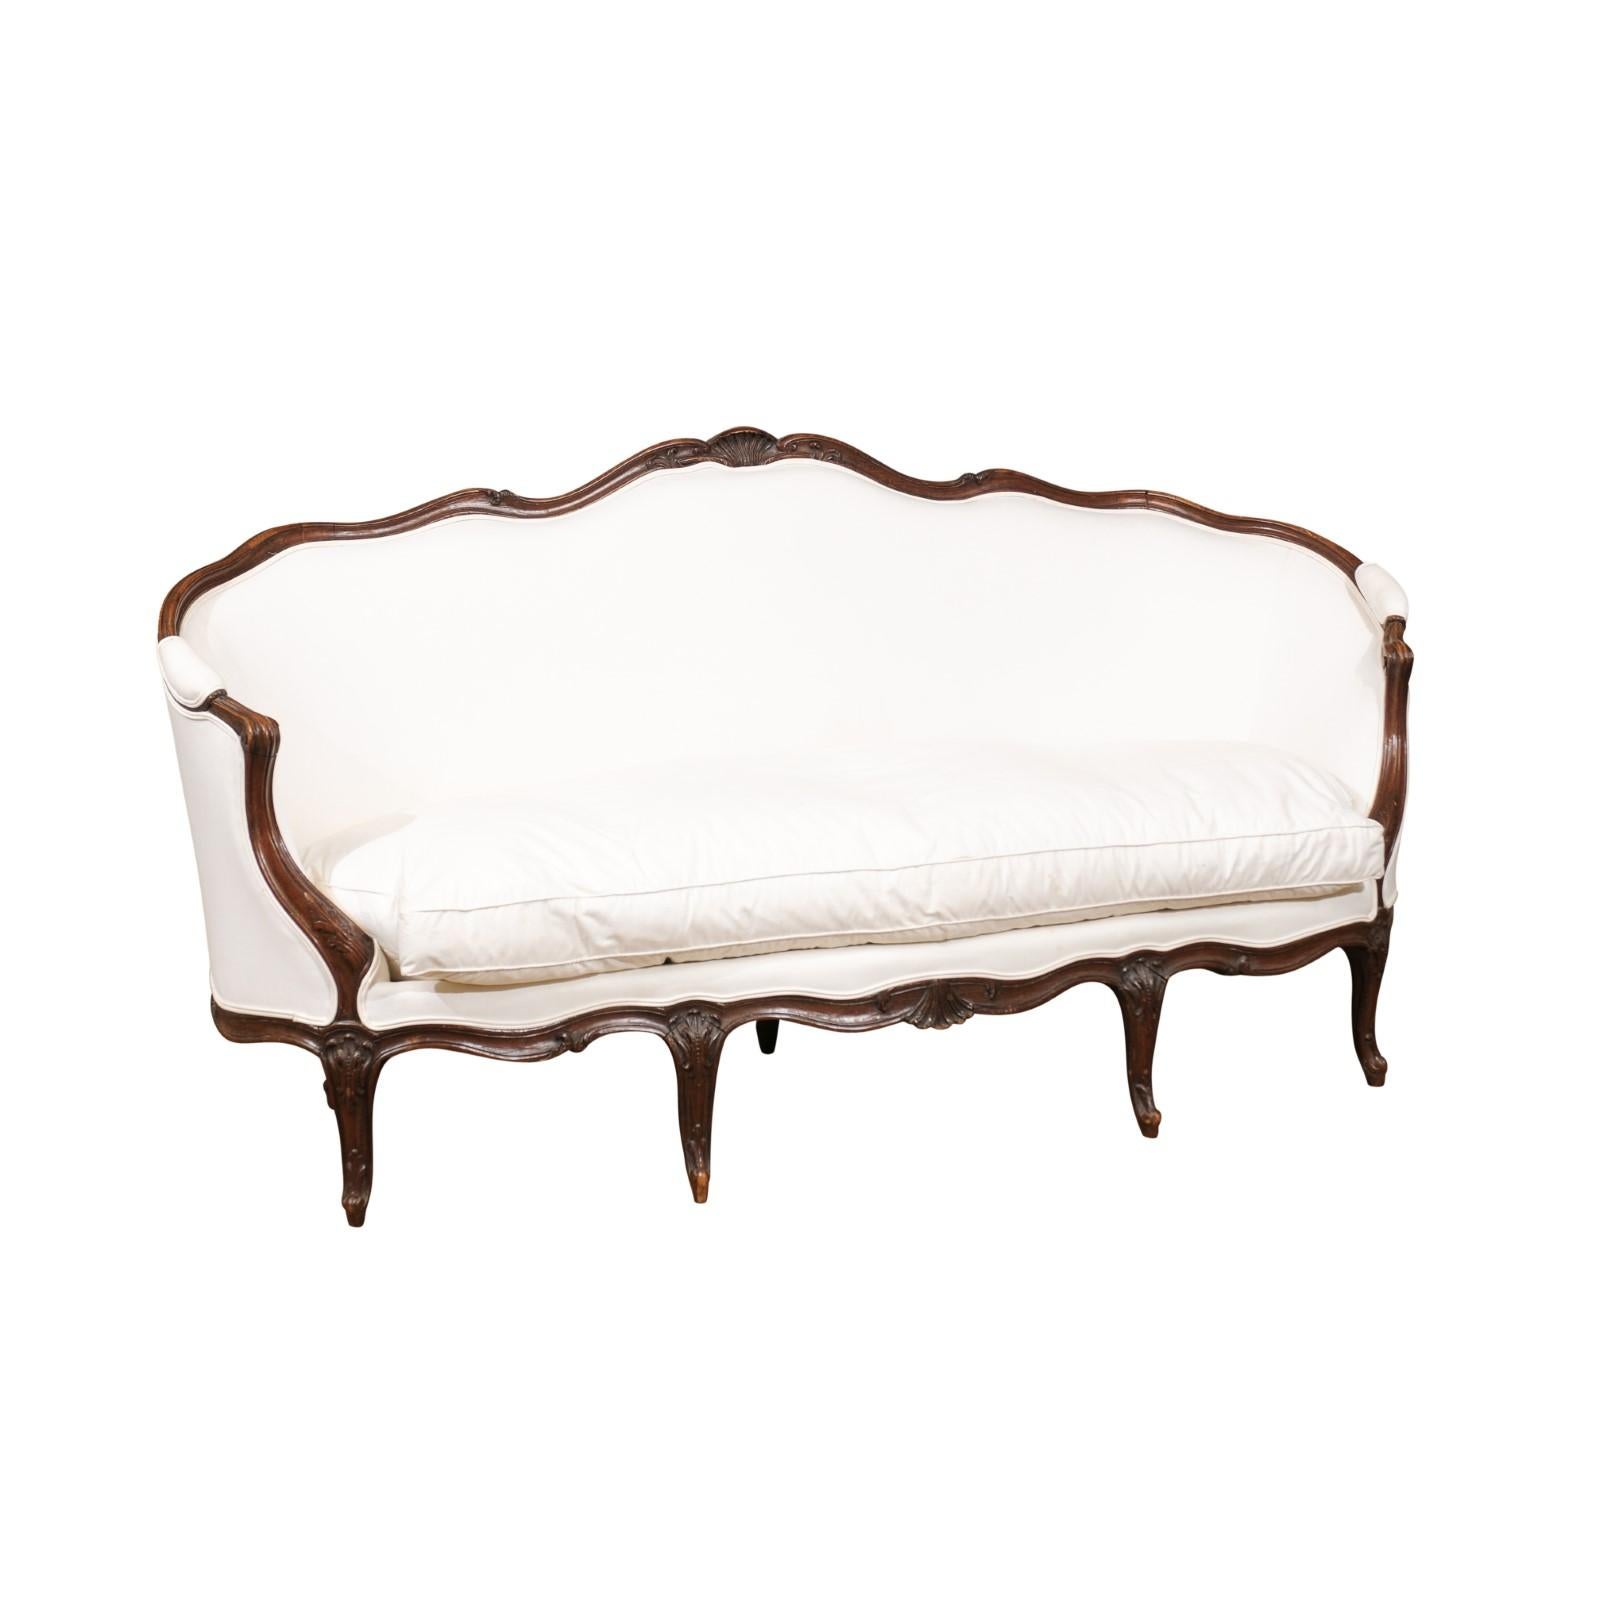 A French, Louis XV style walnut canapé from the mid-19th century, with wraparound back, scrolled arms, cabriole legs and new beige upholstery. This French canapé features a delicate wraparound back, adorned with a shell-carved crest as well as tall,